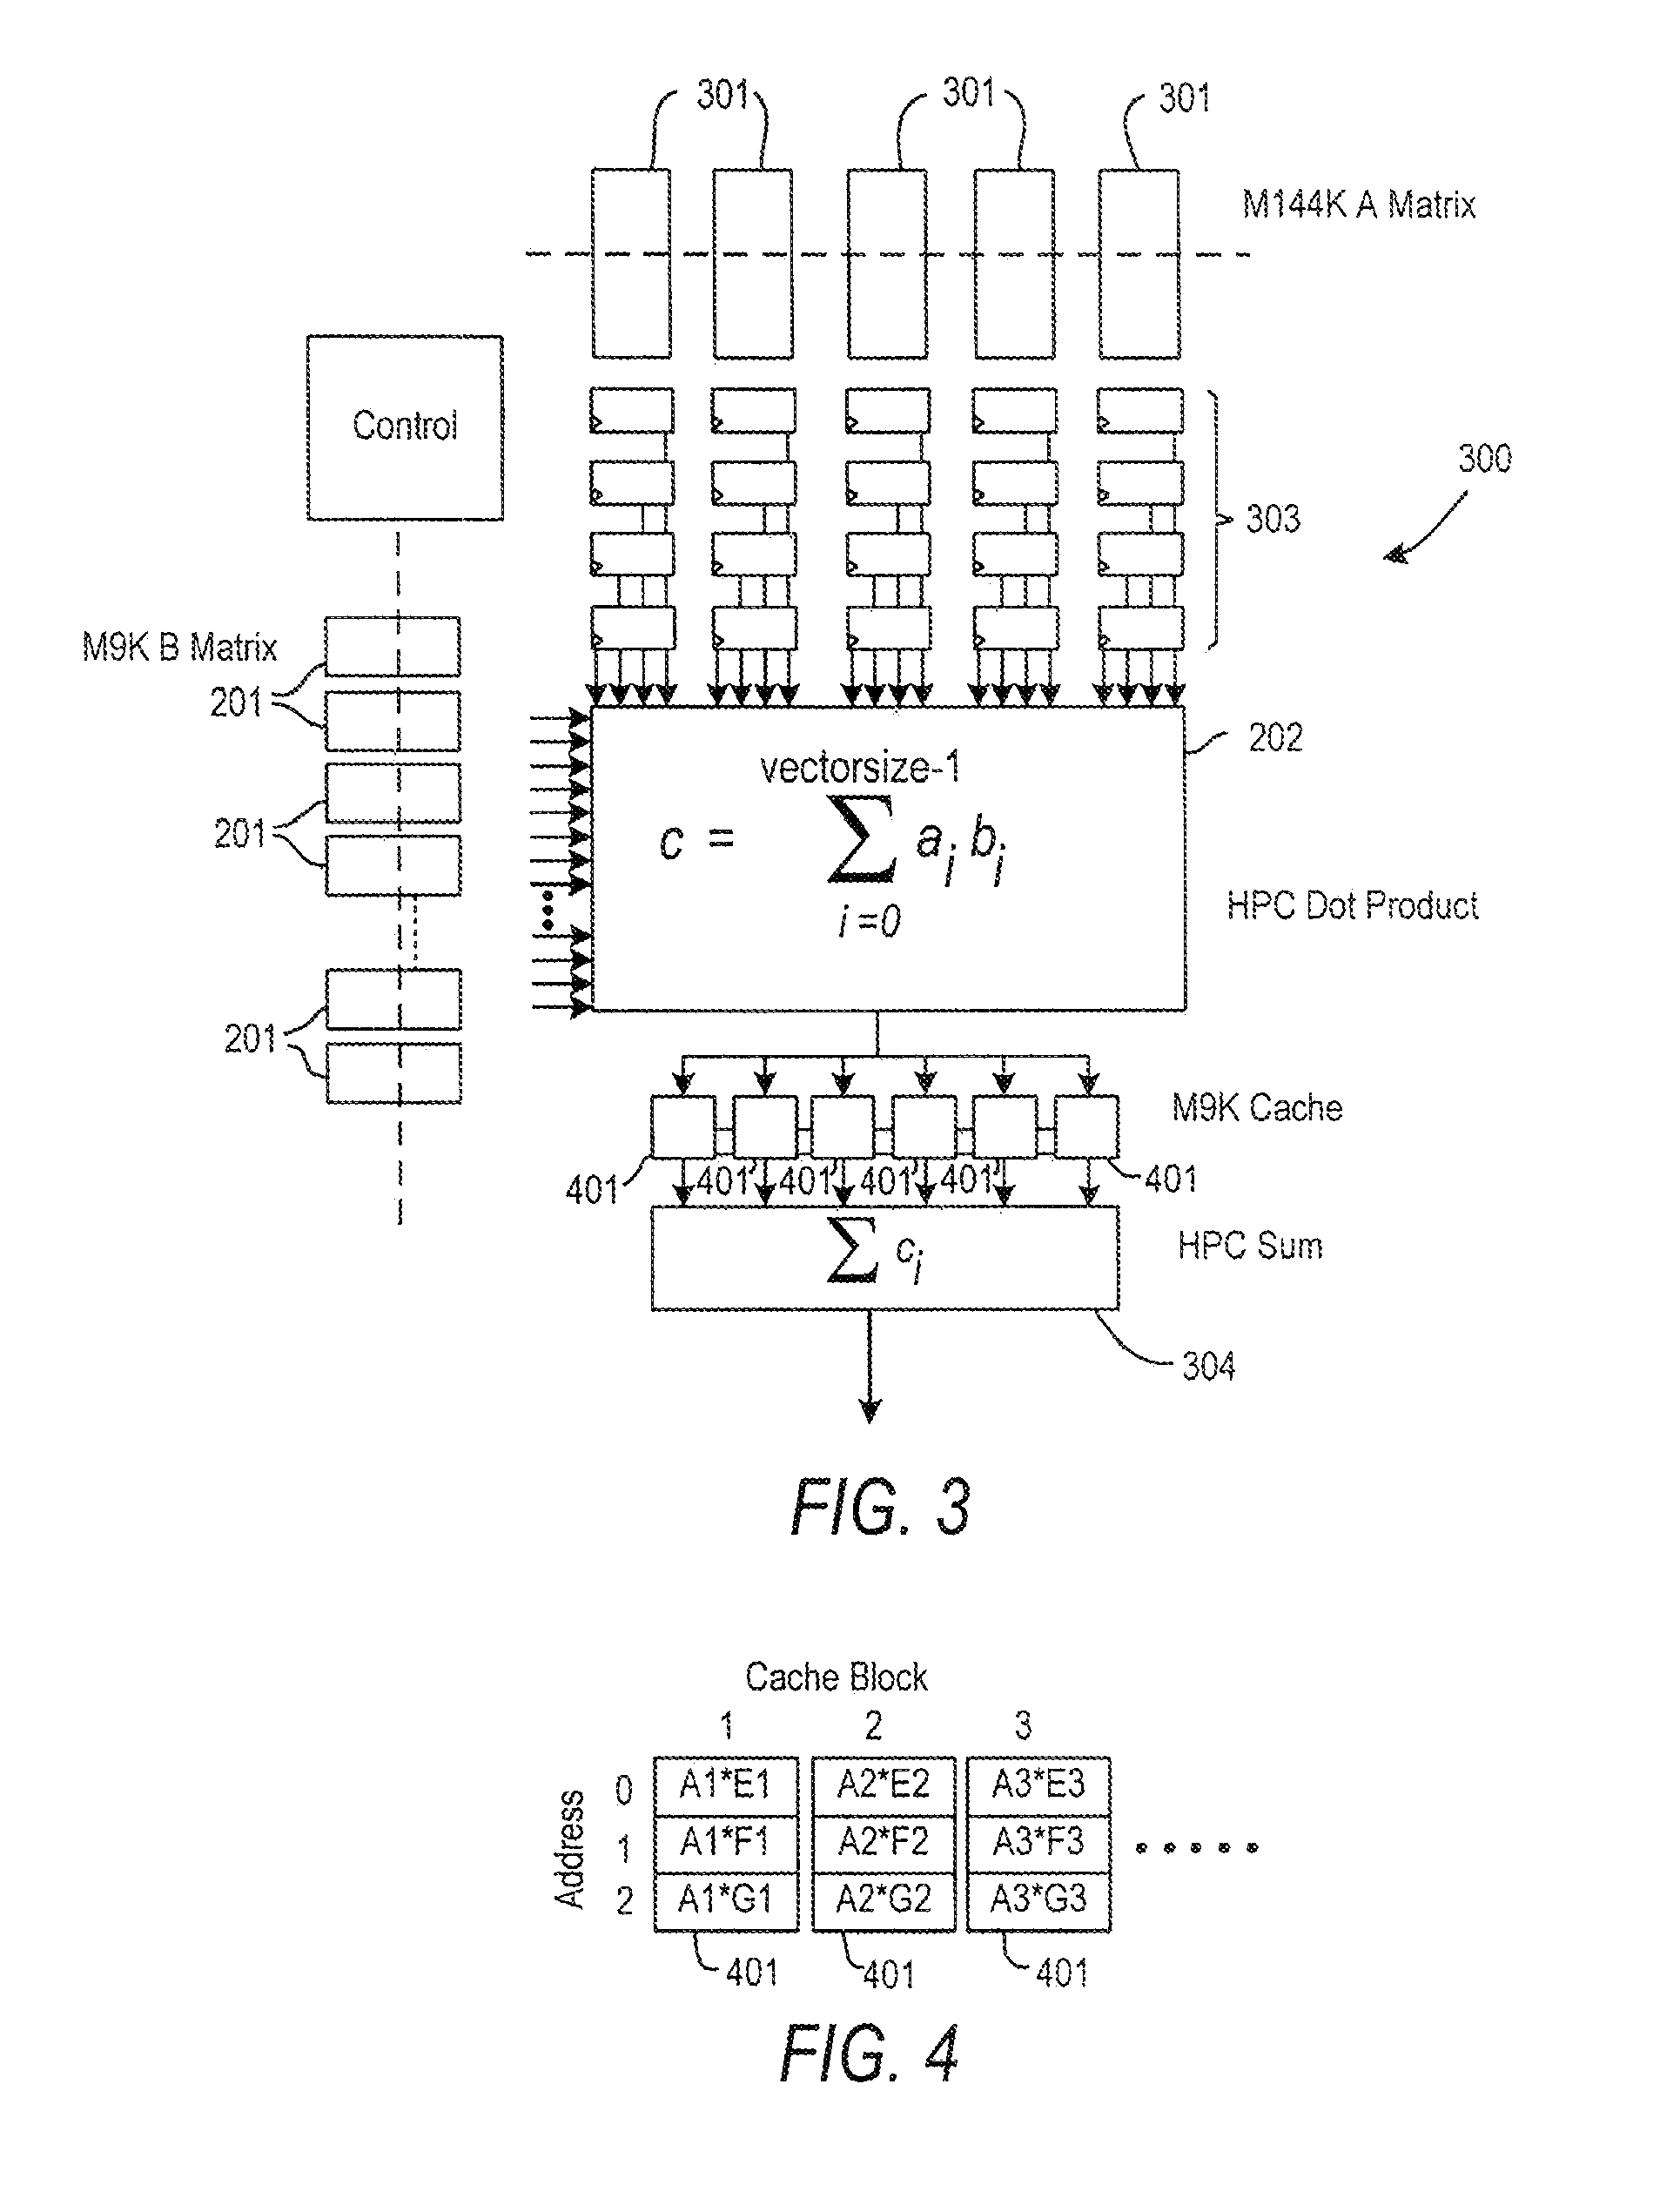 Configuring a programmable integrated circuit device to perform matrix multiplication